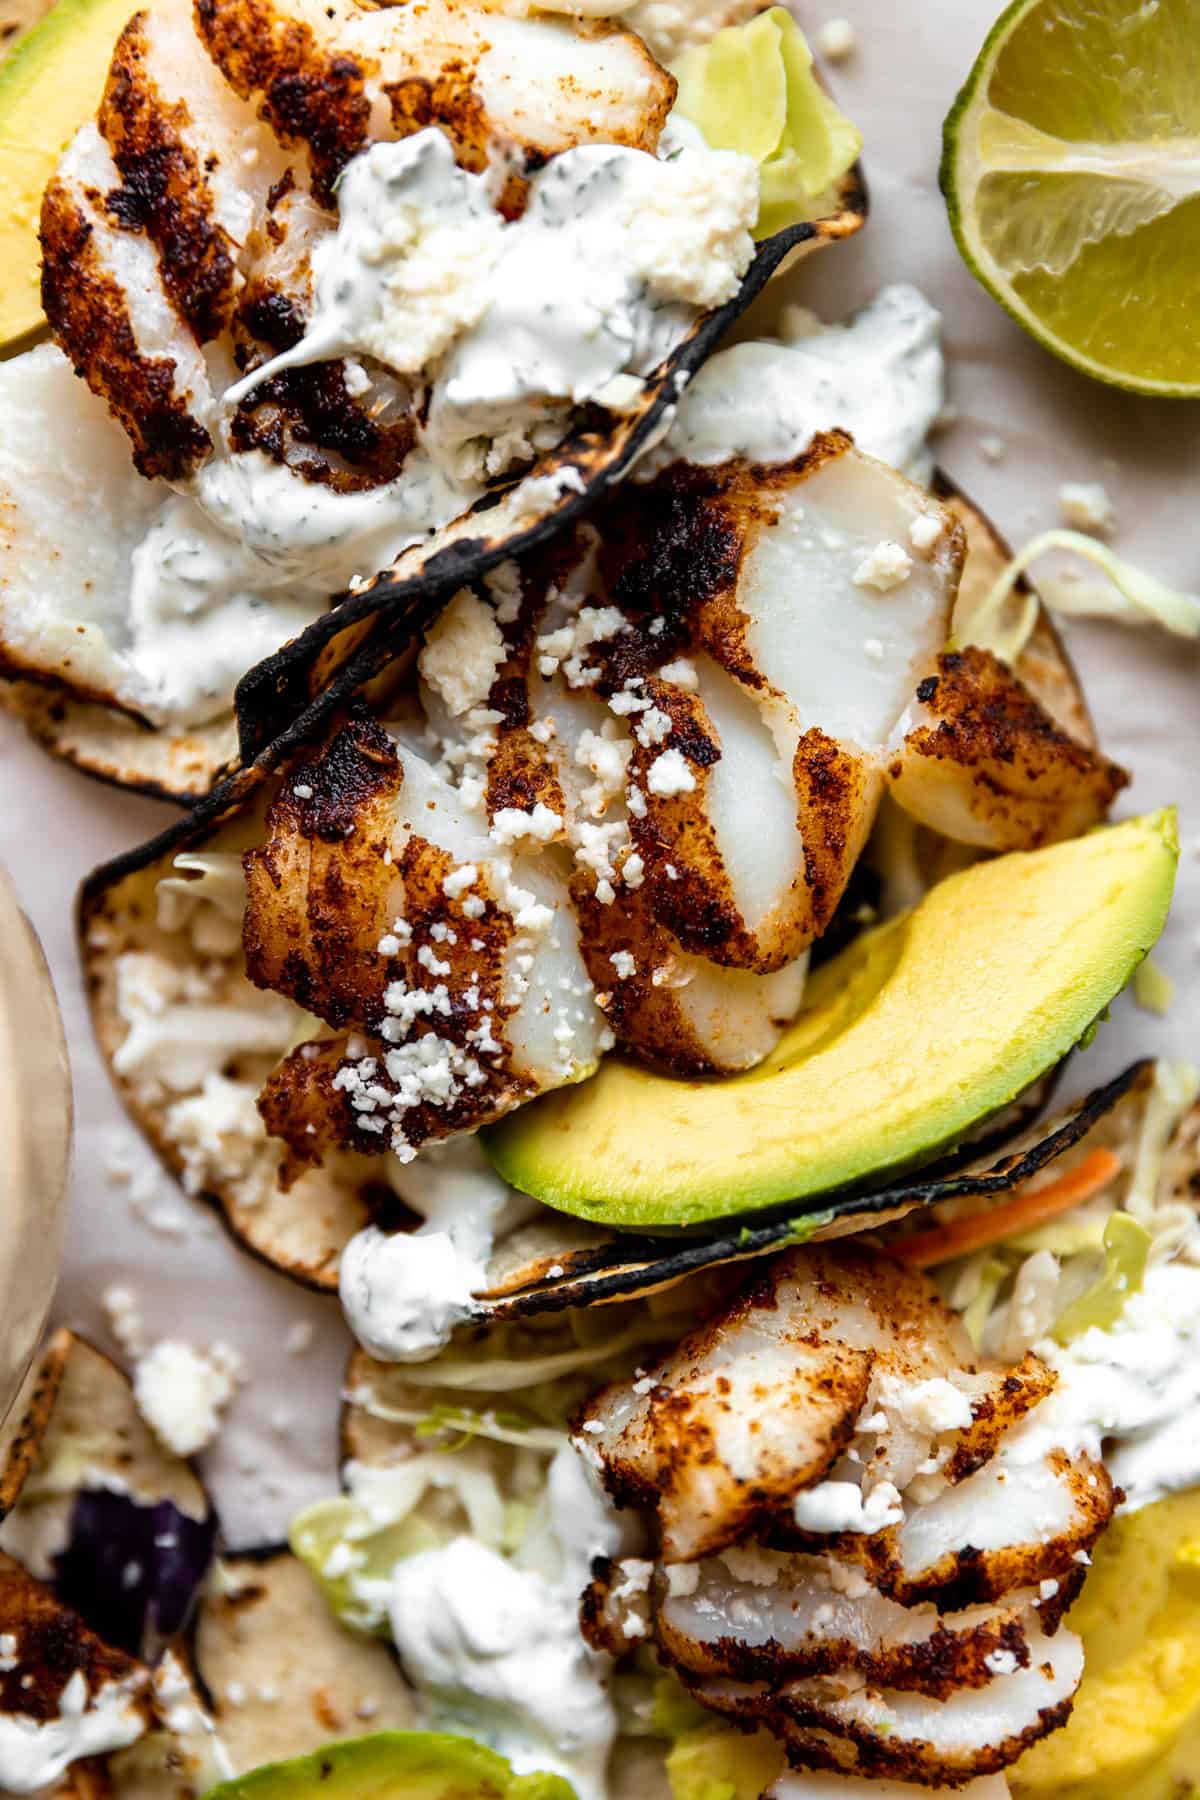 Grilled fish tacos on charred corn tortillas served with avocado slices and cilantro crema drizzled on top.